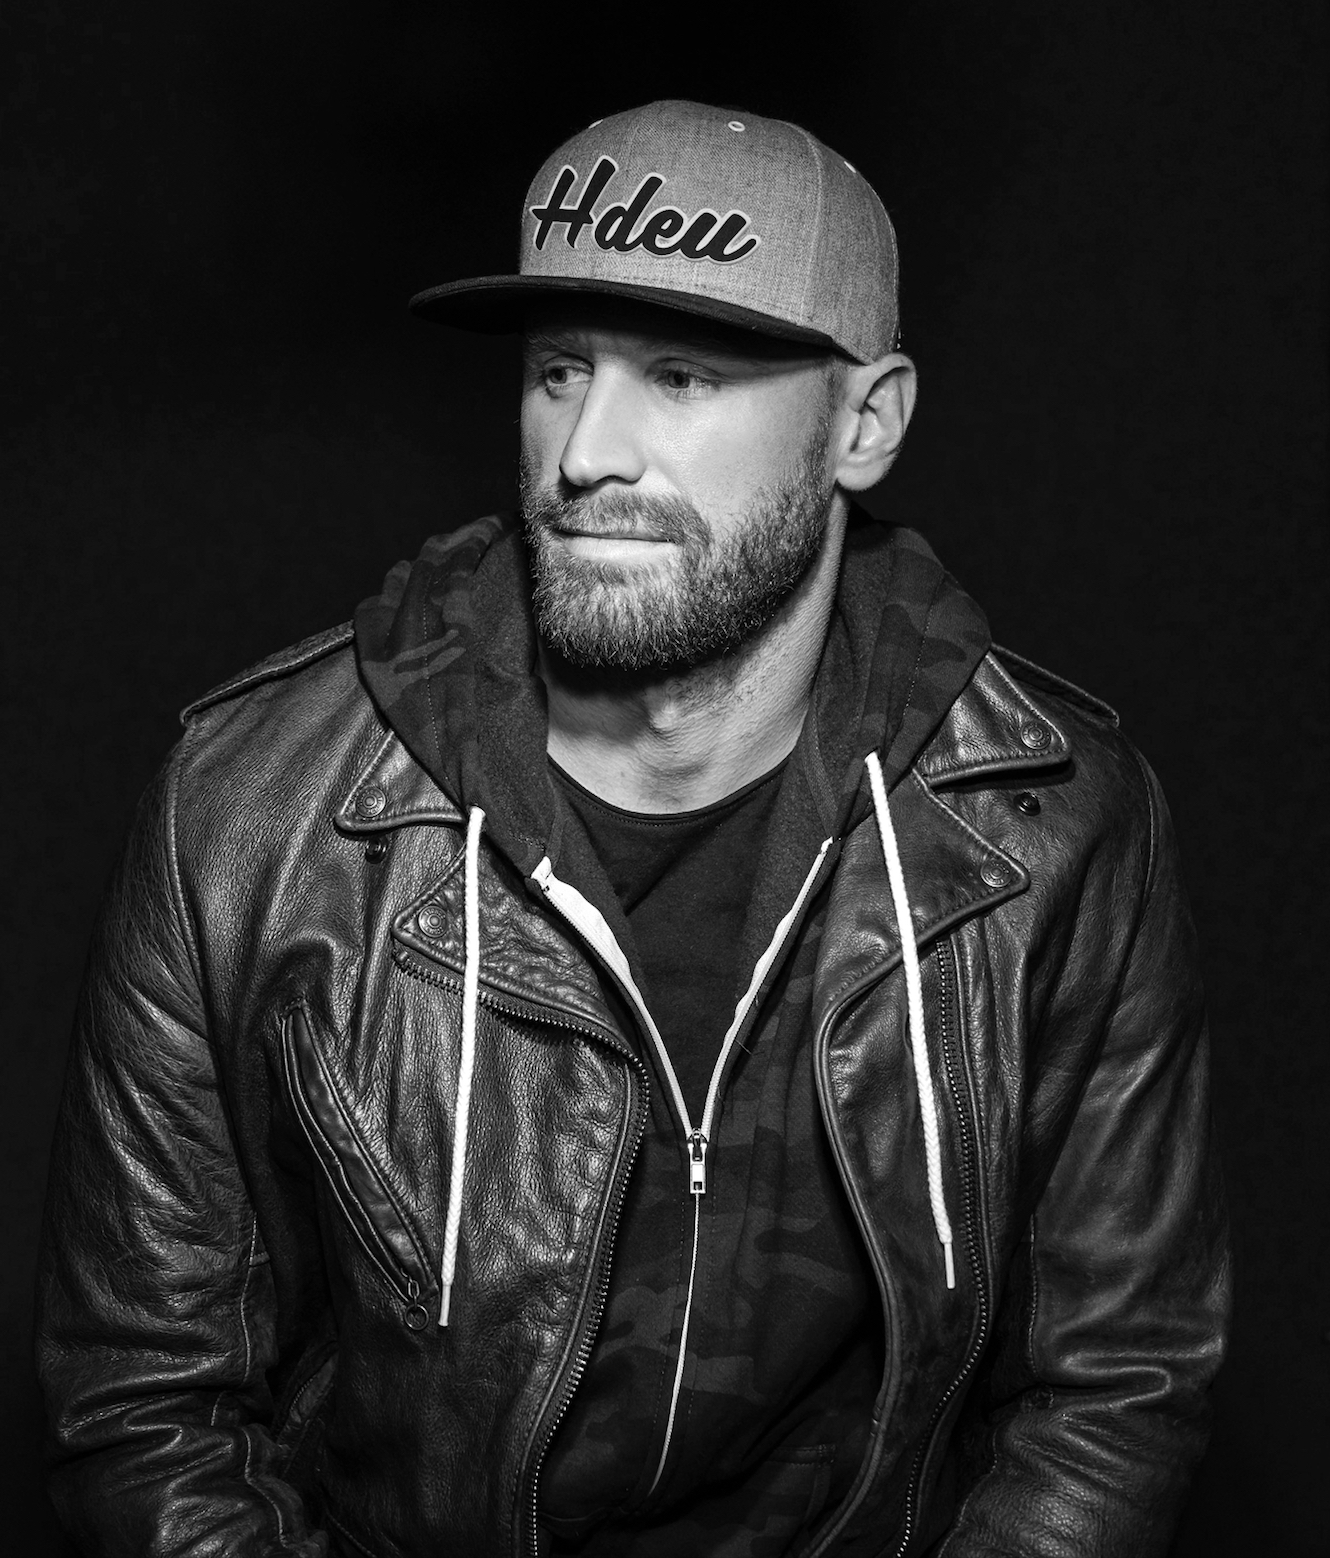 New Music Friday: Chase Rice Continues the Musical Journey with “The Album Part II”